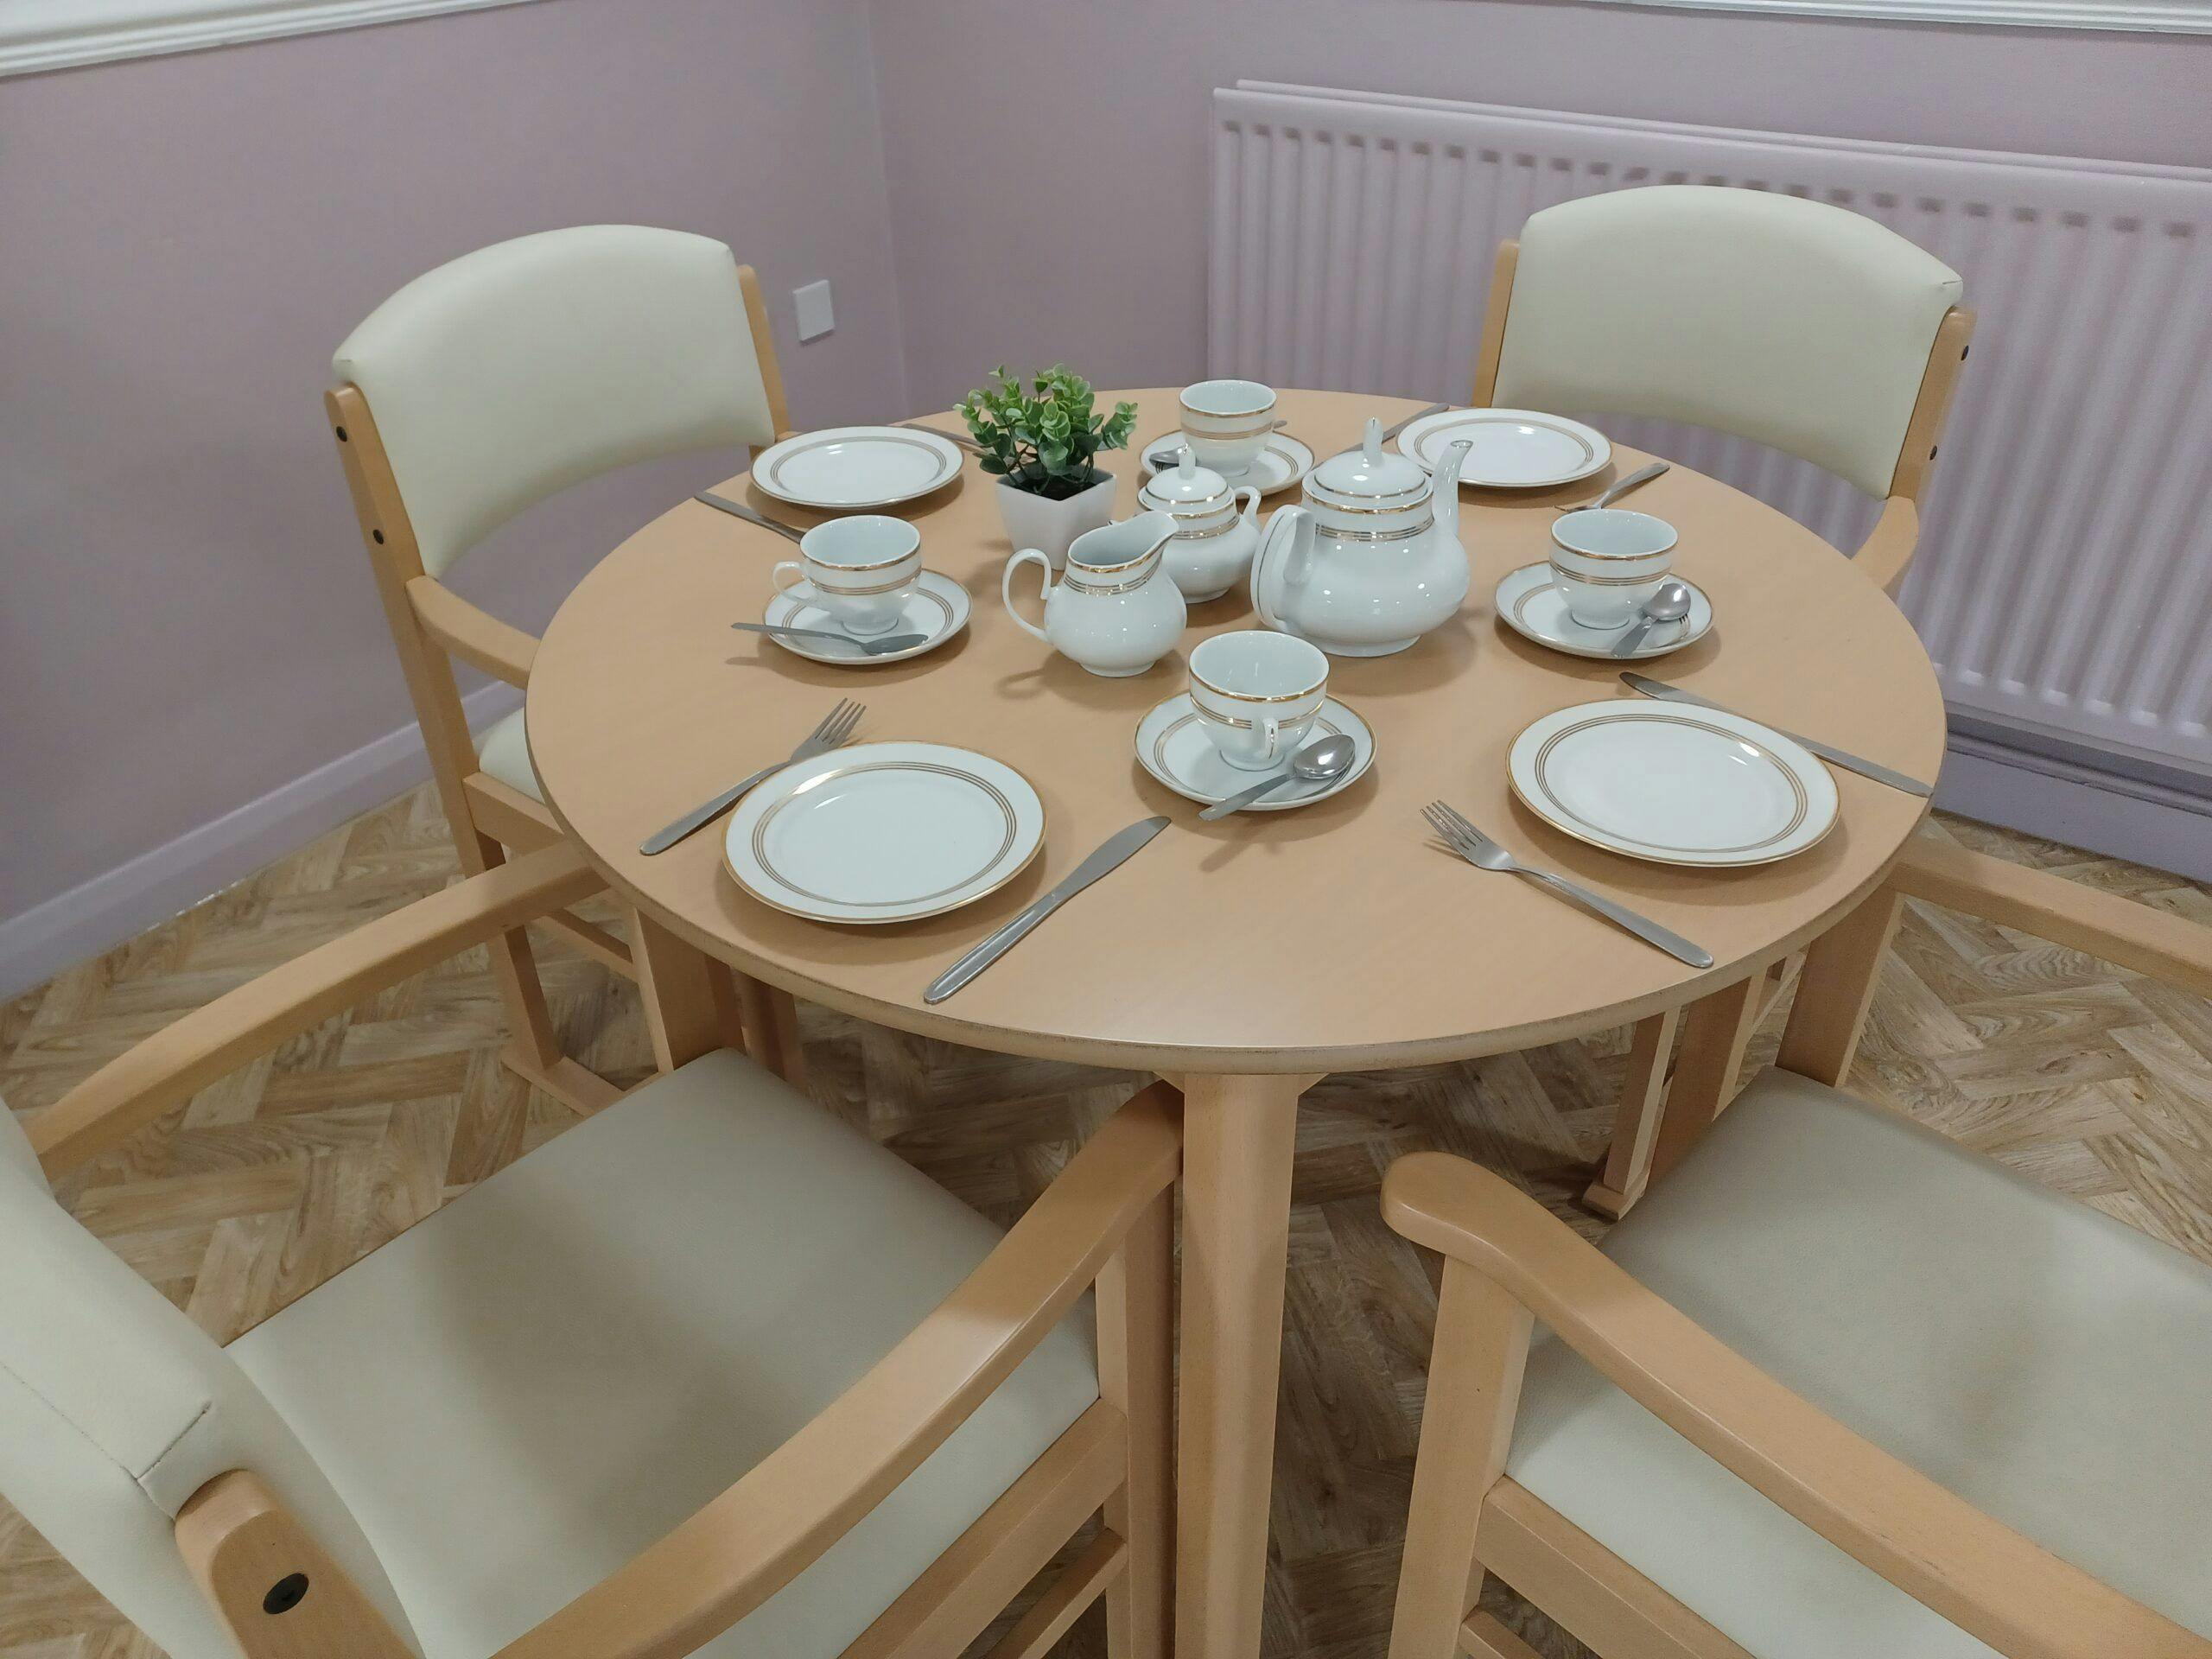 Dining area at Knowles Court Care Home, Bradford, West Yorkshire